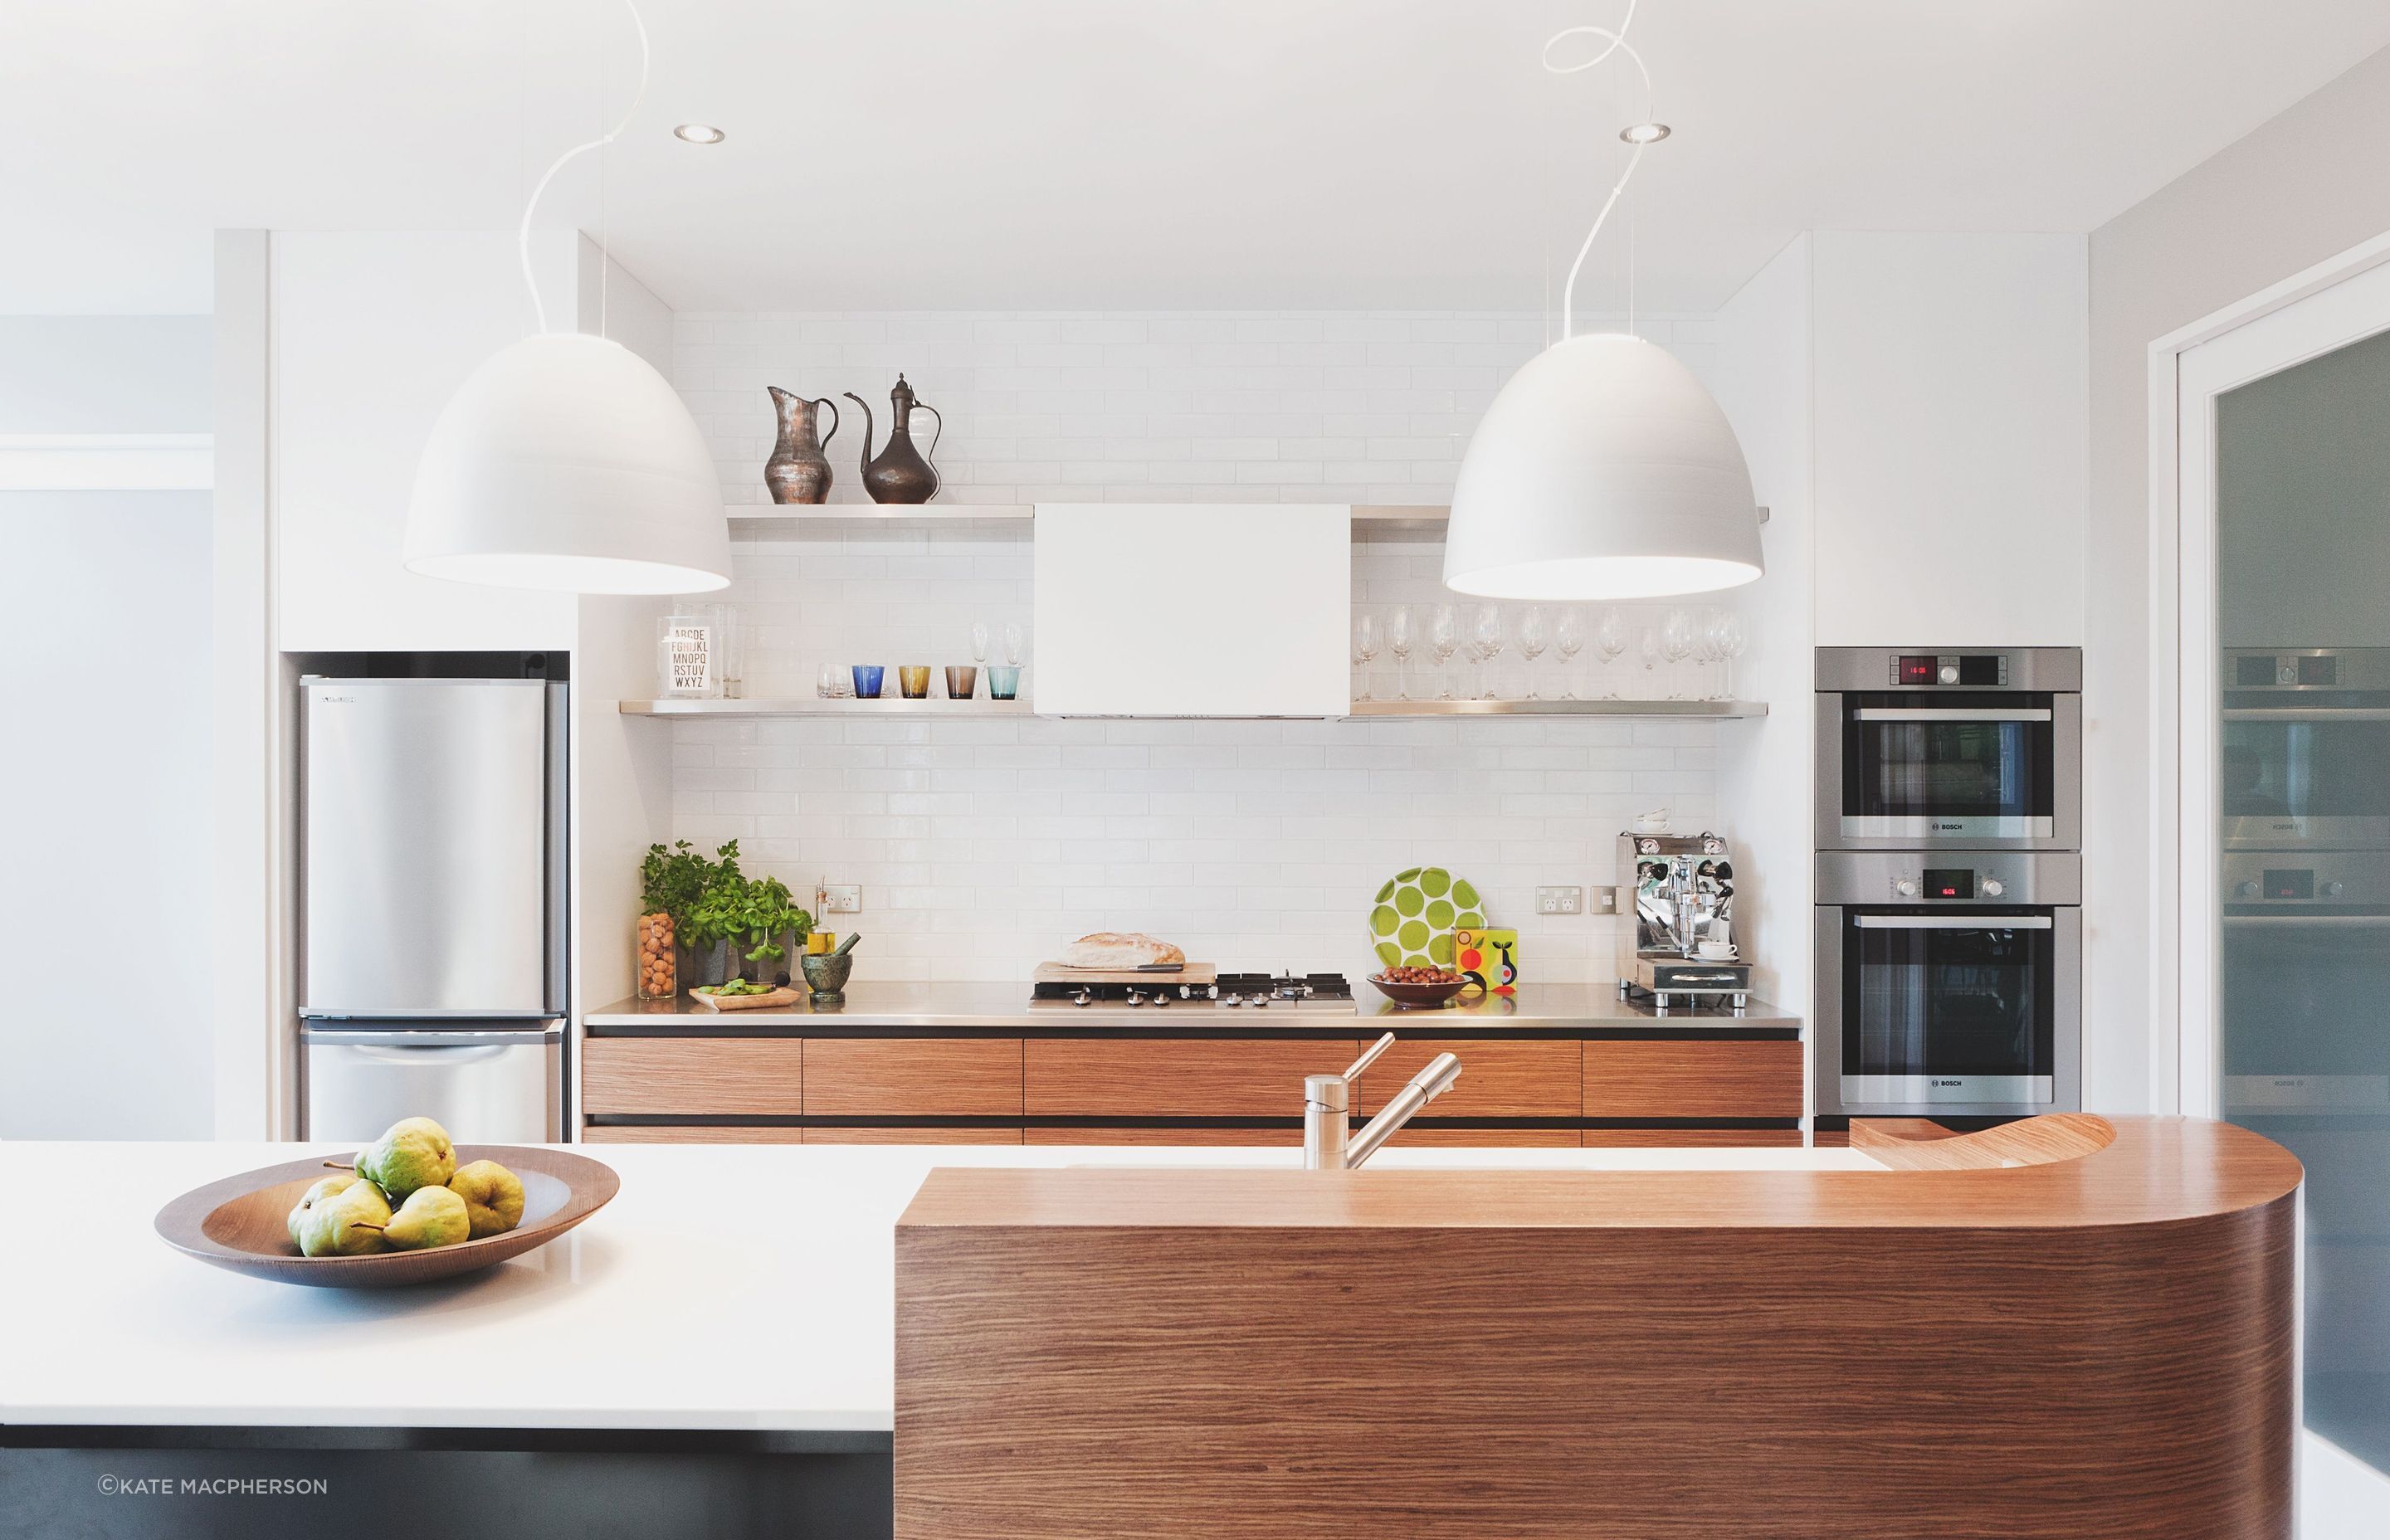 Design Solutions For Kitchens